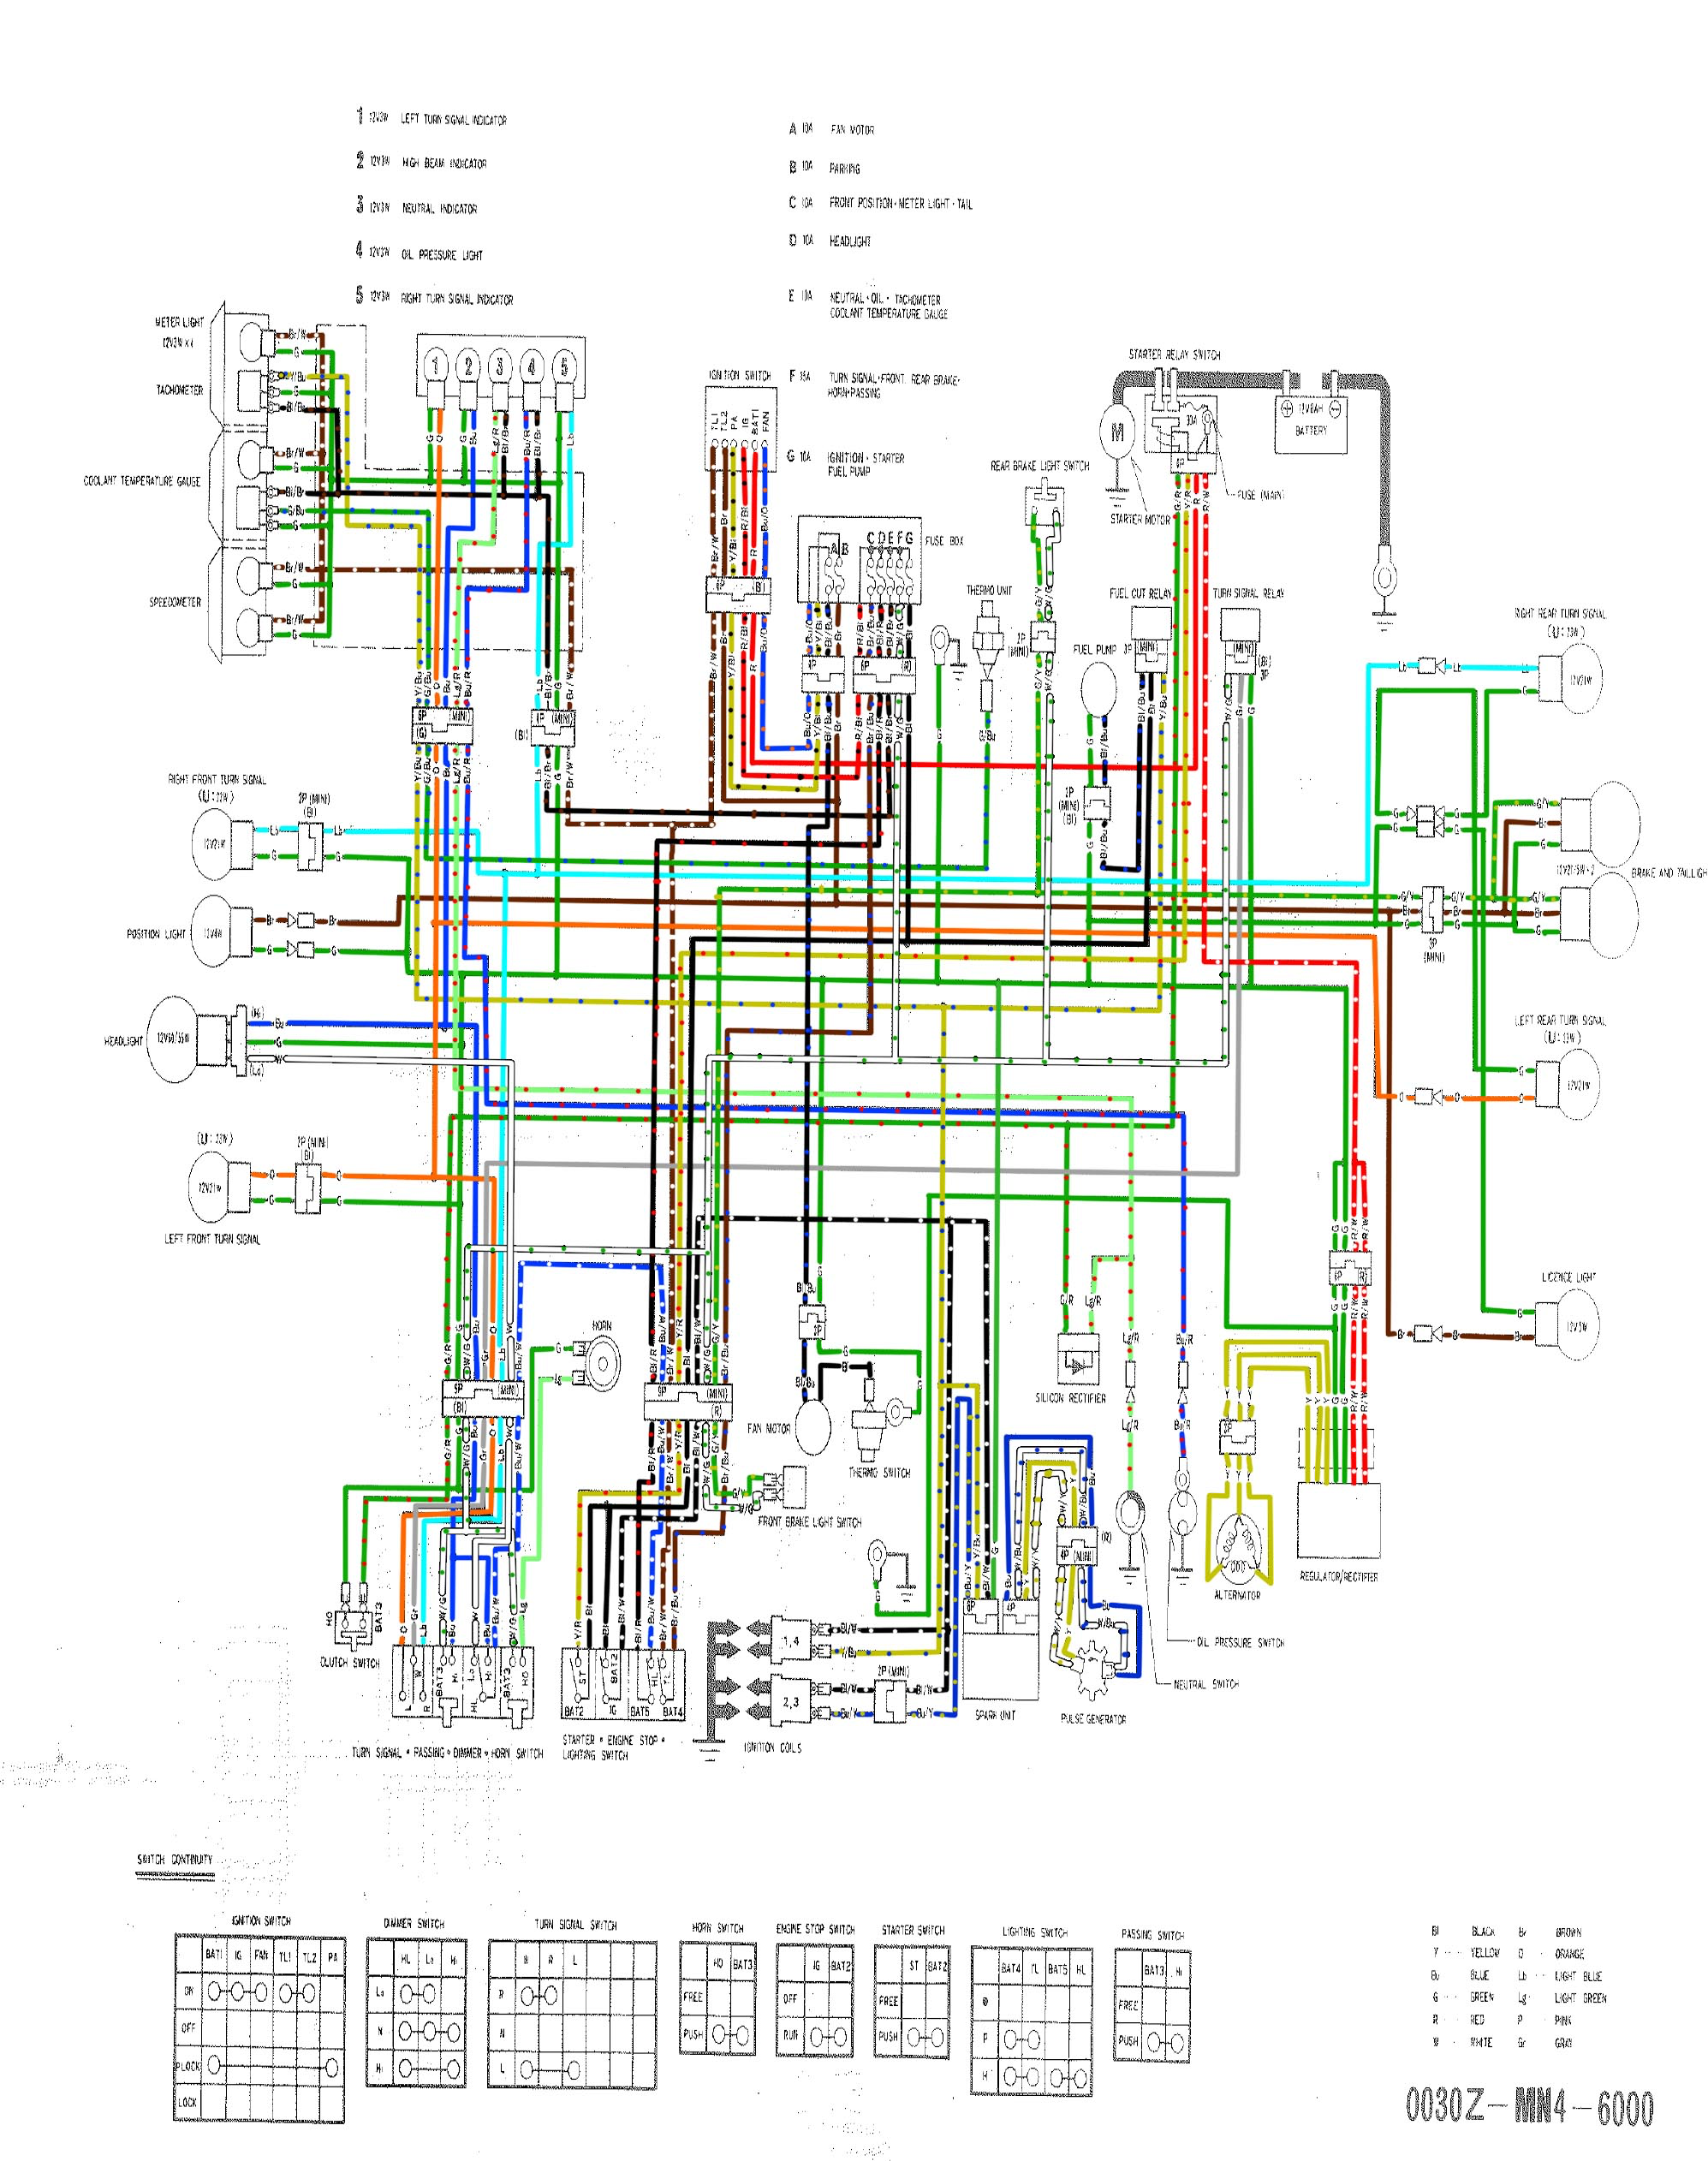 Wire diagram - CBR Forum - Enthusiast forums for Honda CBR Owners  1994 Honda Cbr 600 Wiring Diagram    CBR Forum